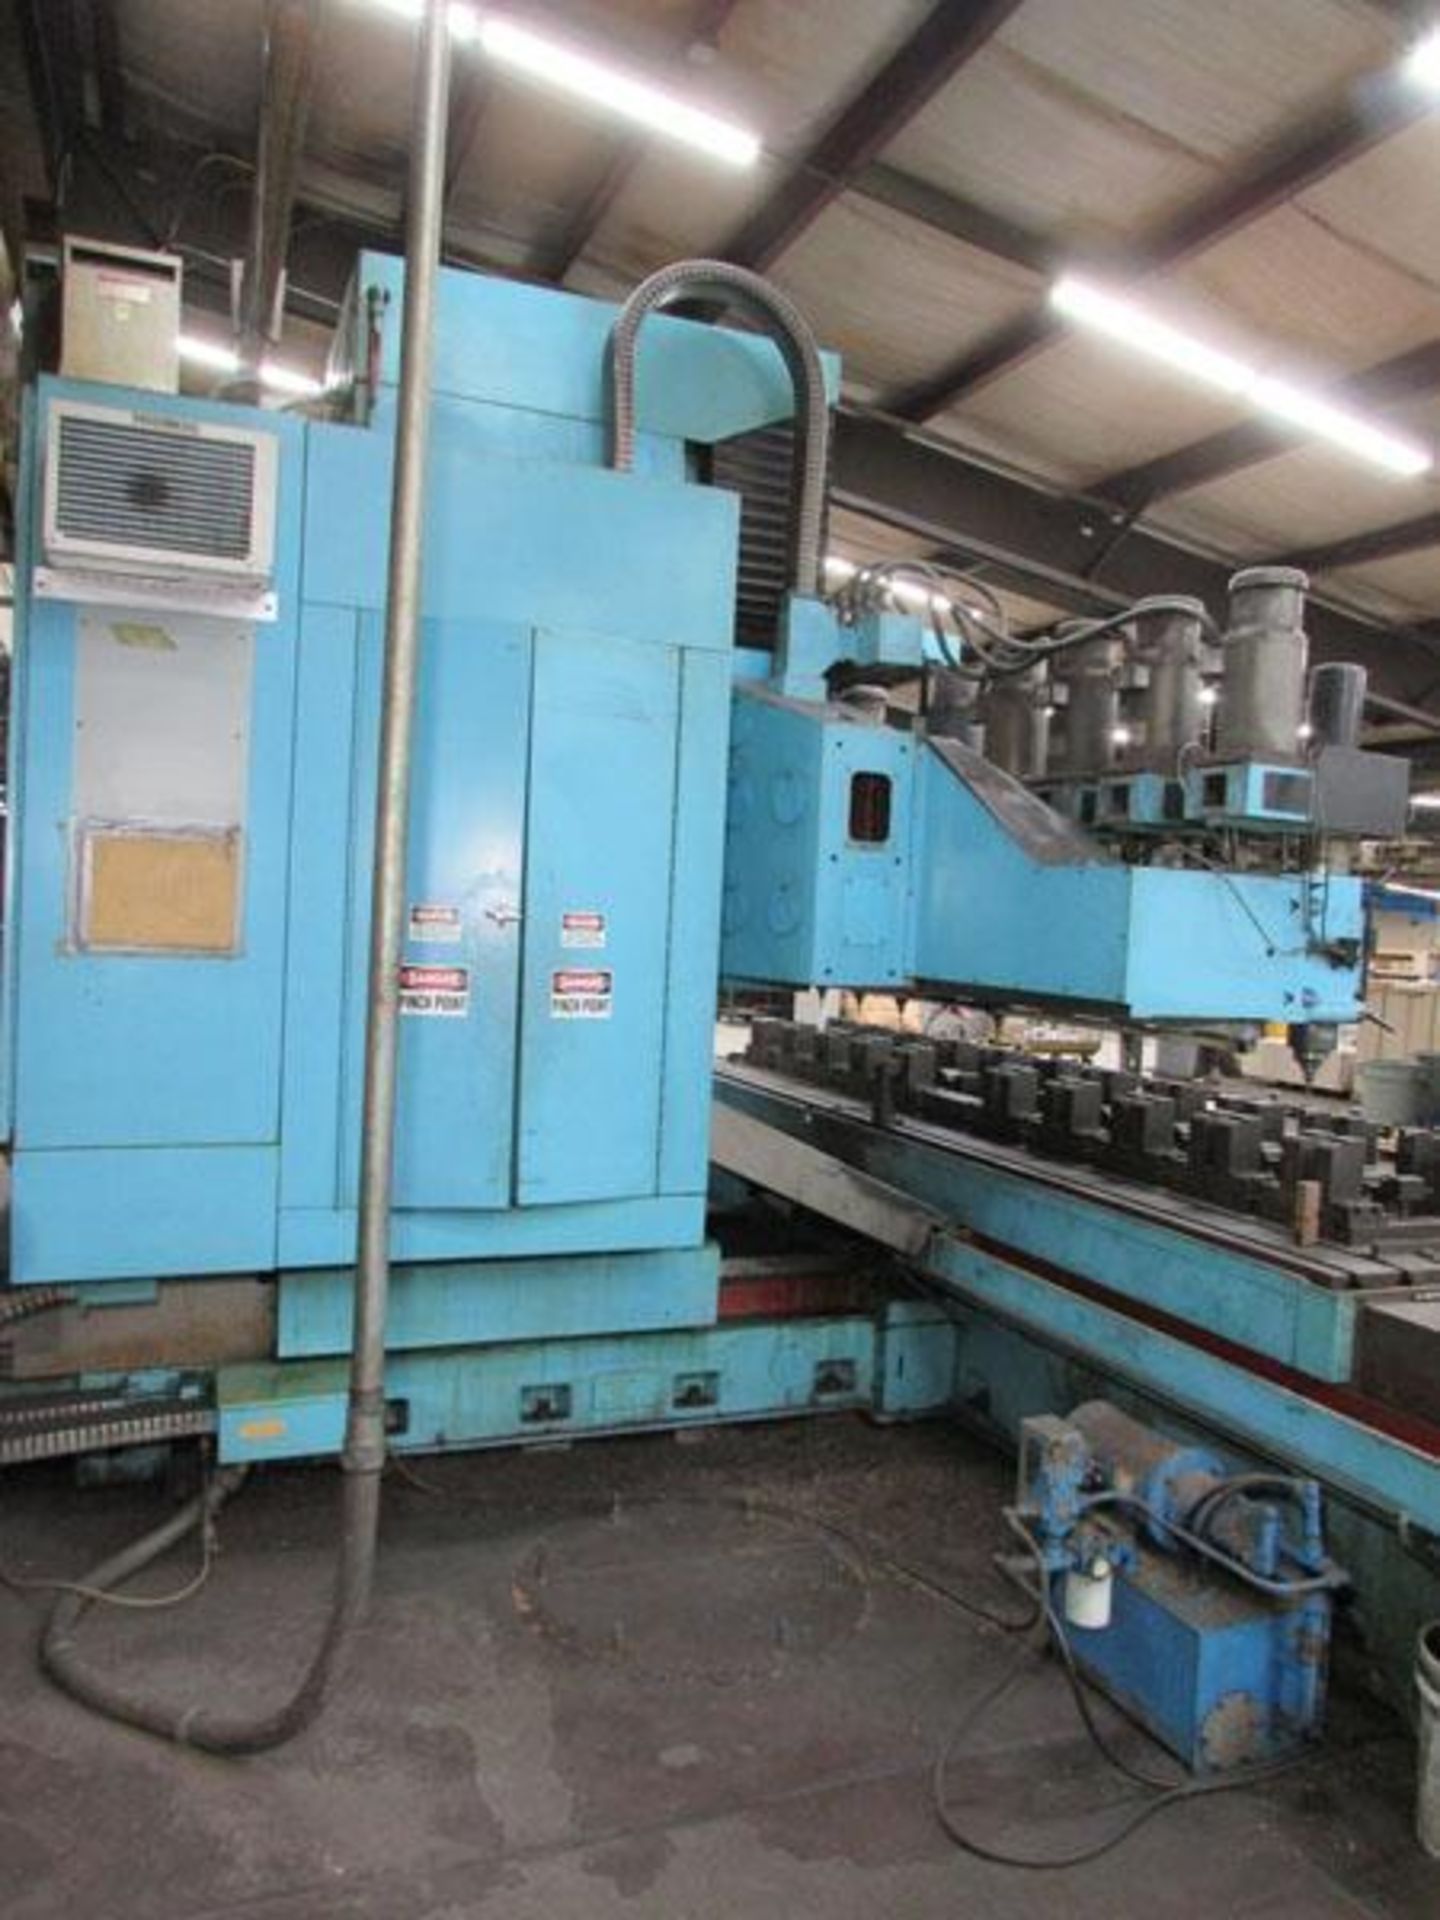 Seaberg MCP 1000 10 Spindle CNC Vertical Milling Machine - Image 19 of 21